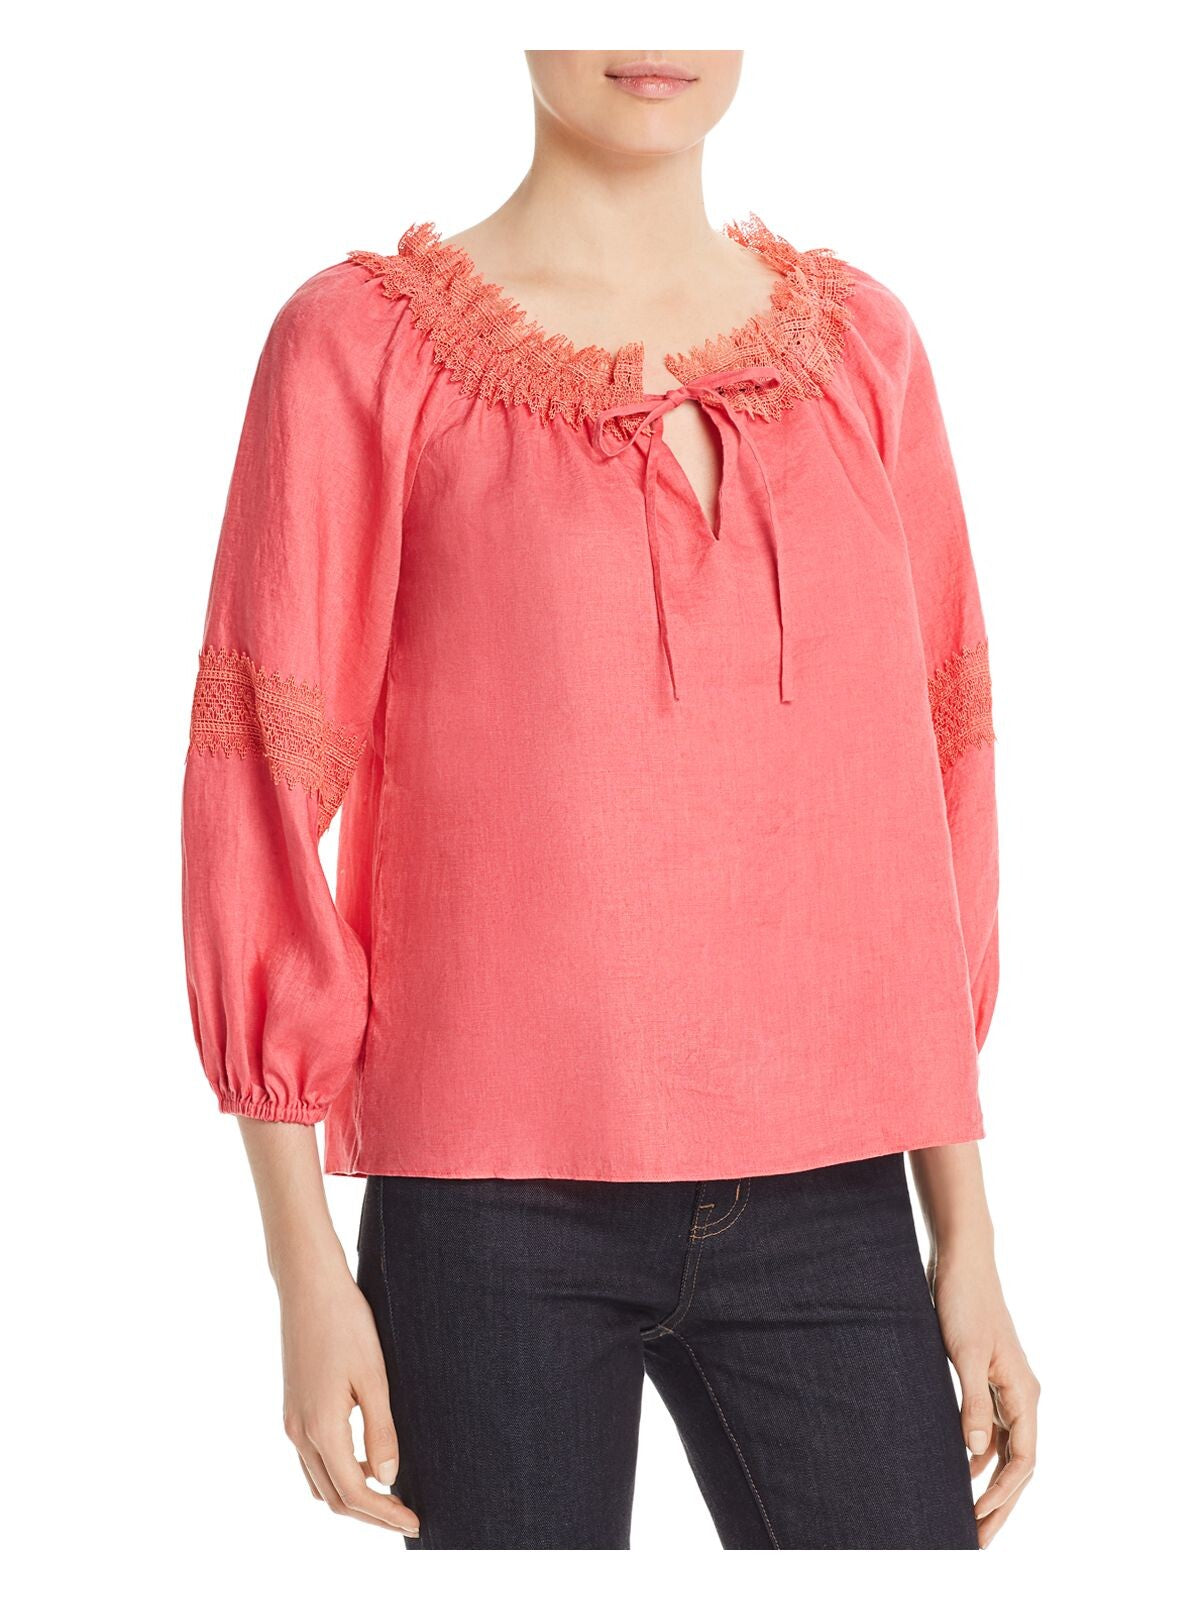 LE GALI Womens Pink Lace  Trim 3/4 Sleeve Tie Neck Top XS